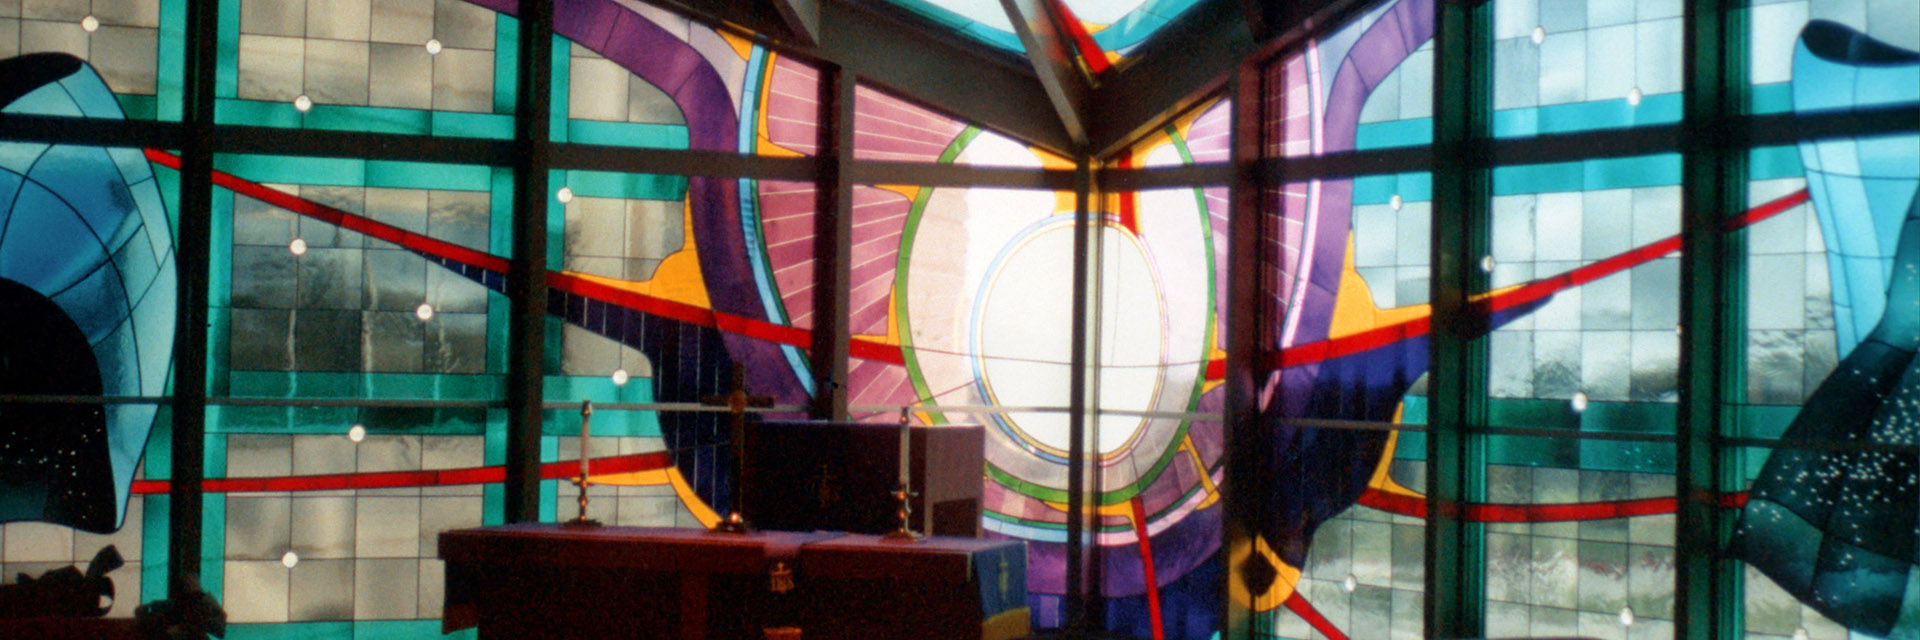 Stained Glass Behind Podium in Plano Chapel